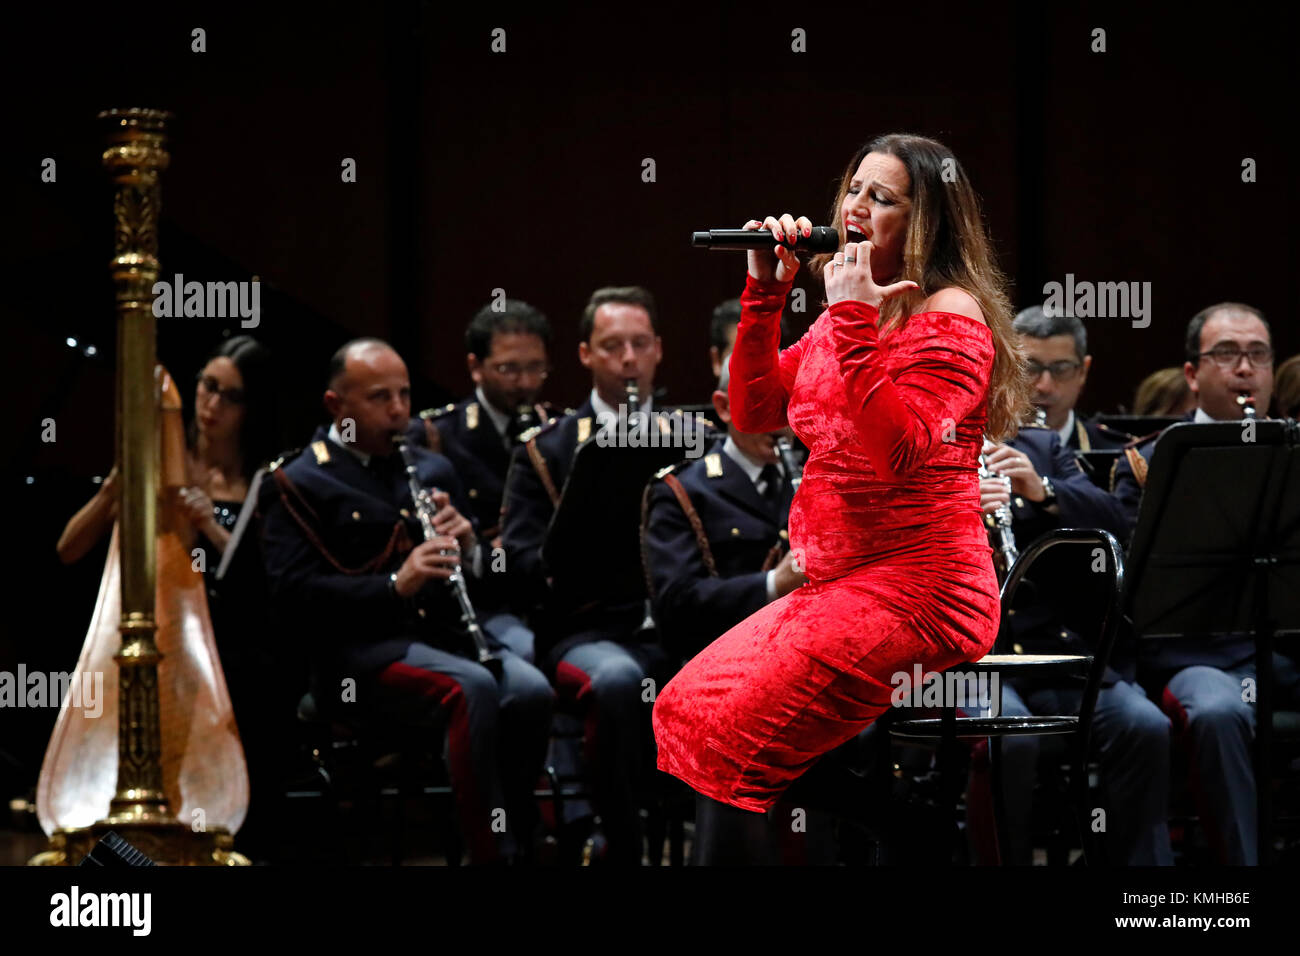 Rome, Italy - 11 December 2017: the singer Annalisa Minetti performs on the stage of the Auditorium Parco della Musica, on the occasion of the concert of the State Police Band, 'Be there always, with music and words'. Stock Photo